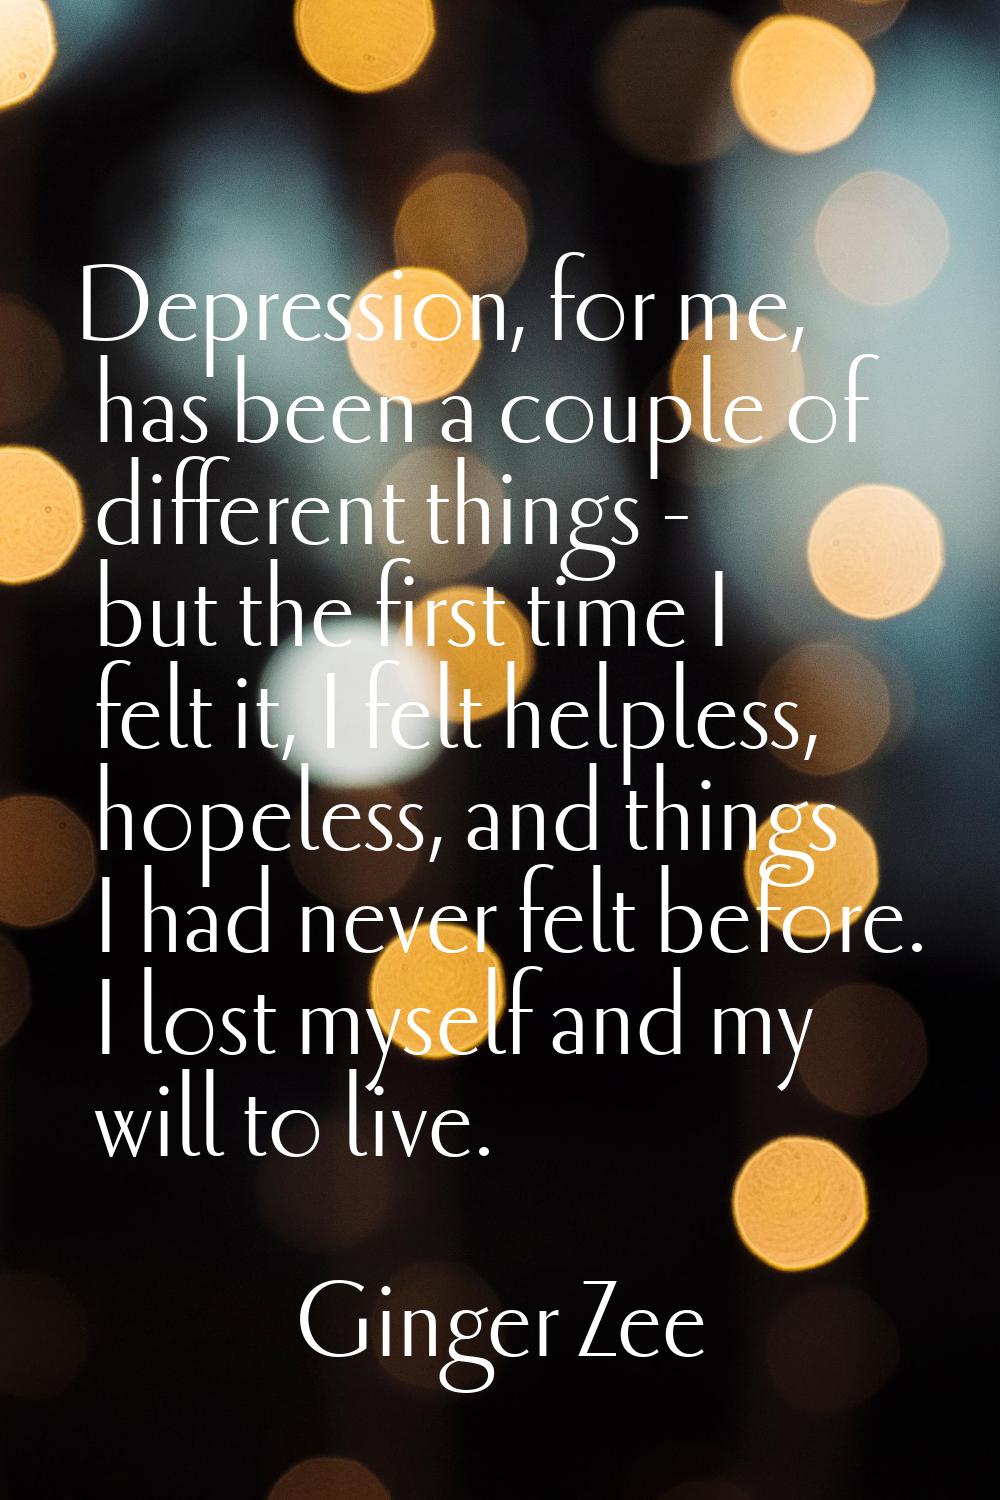 Depression, for me, has been a couple of different things - but the first time I felt it, I felt he